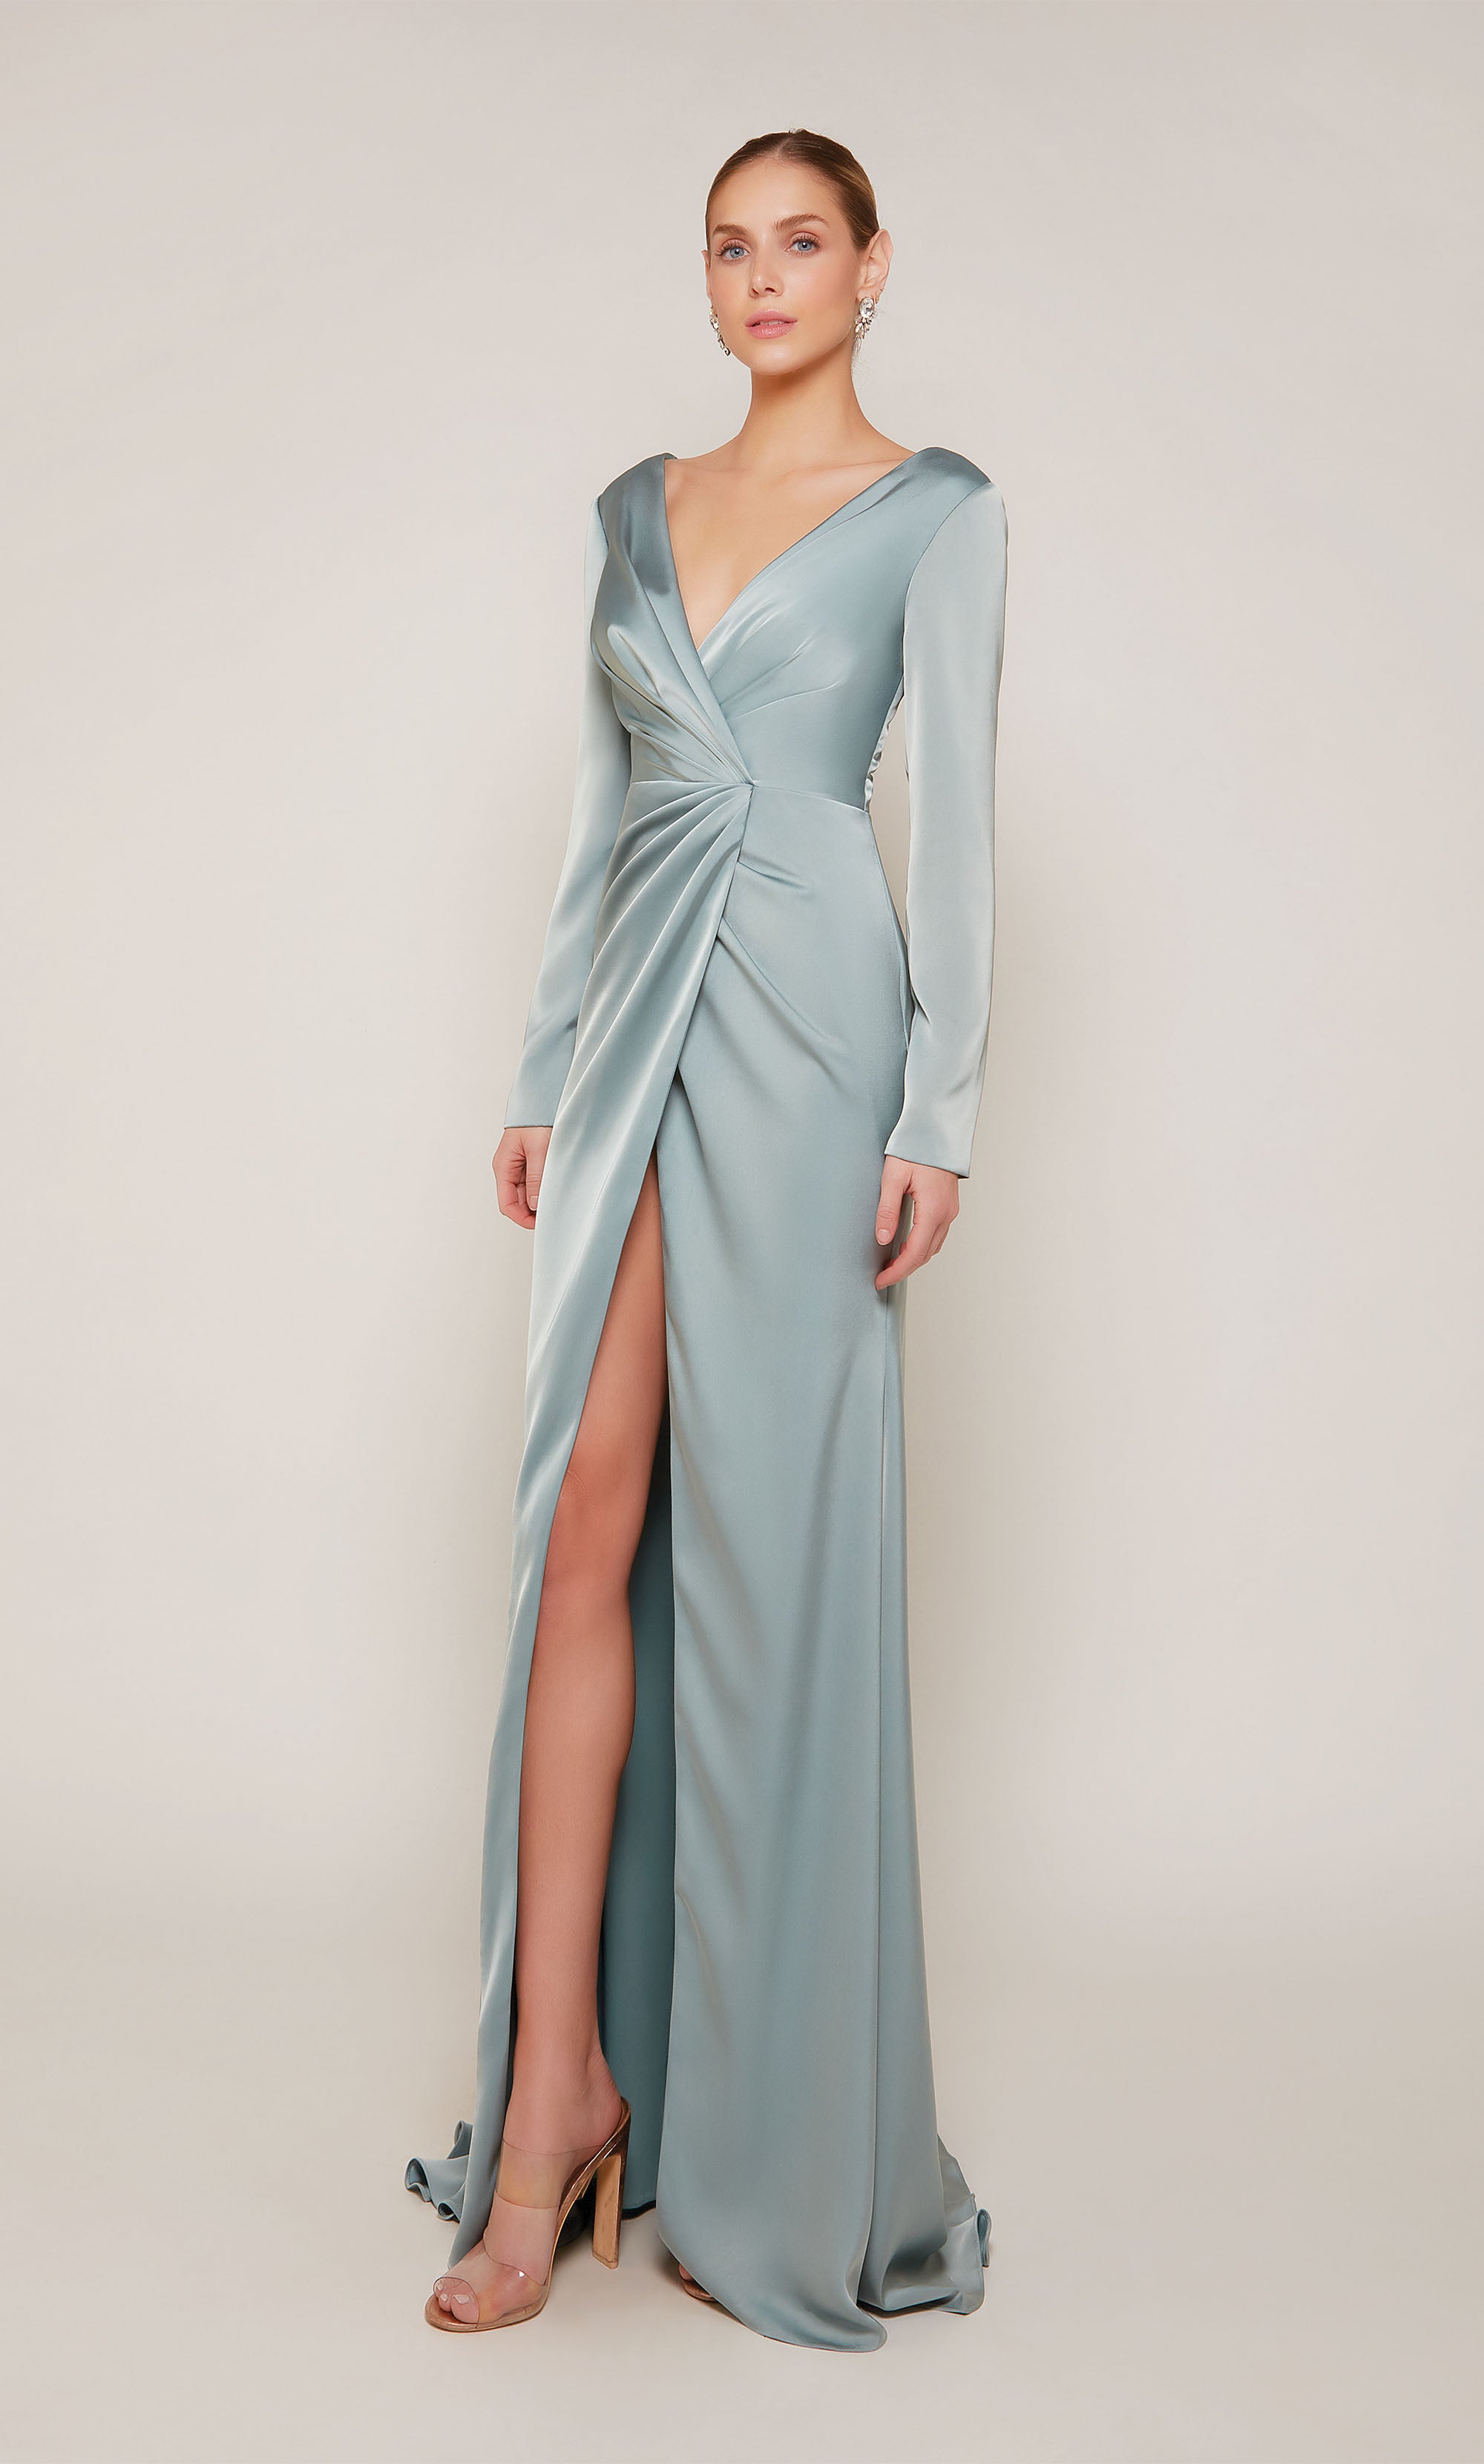 A chic, long sleeve evening gown with a low V-neckline and front slit in a sheen french blue color.